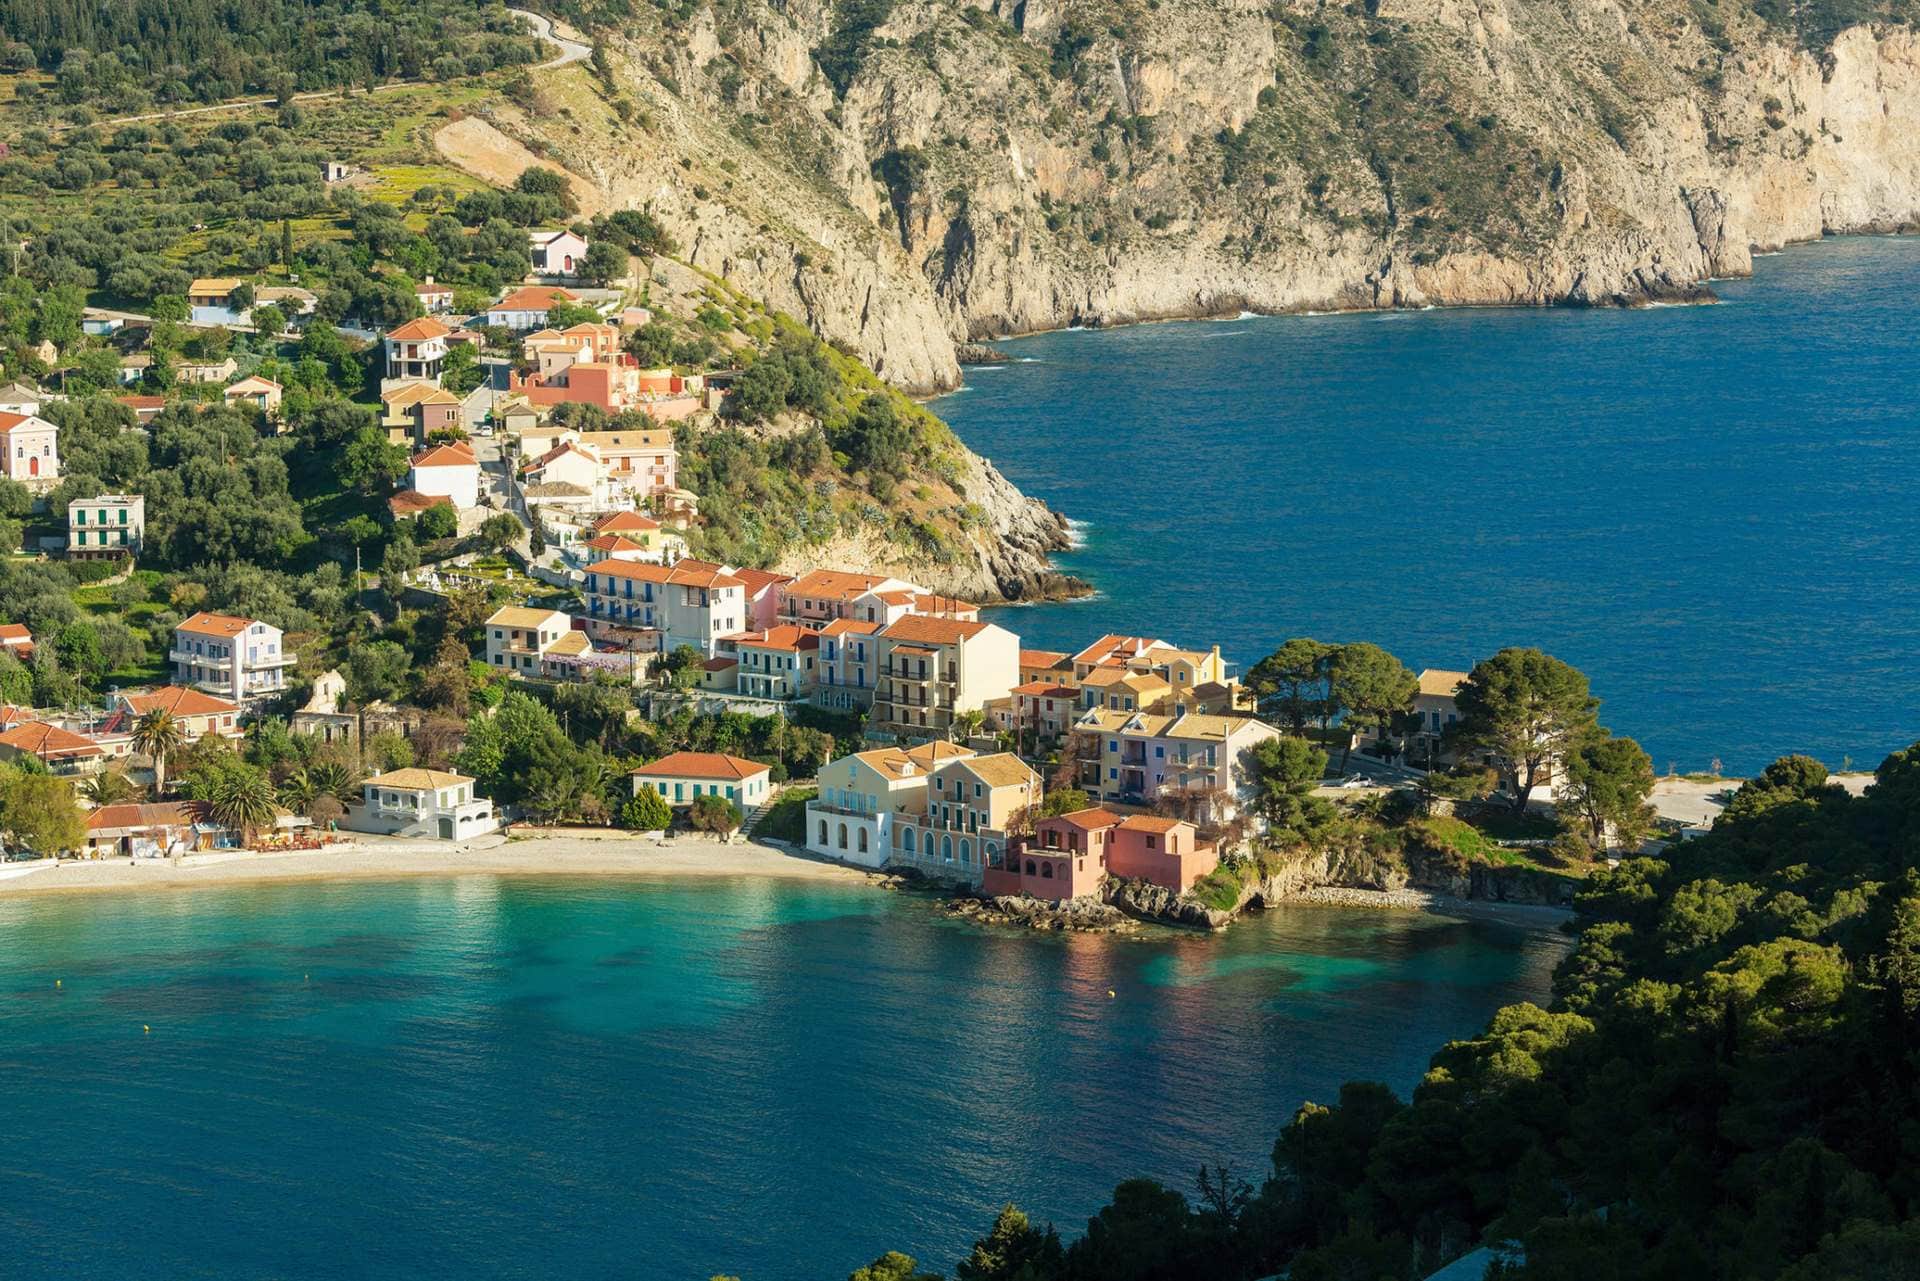 Cycling in Kefalonia - Discover the best riding Greece can offer - GrCycling